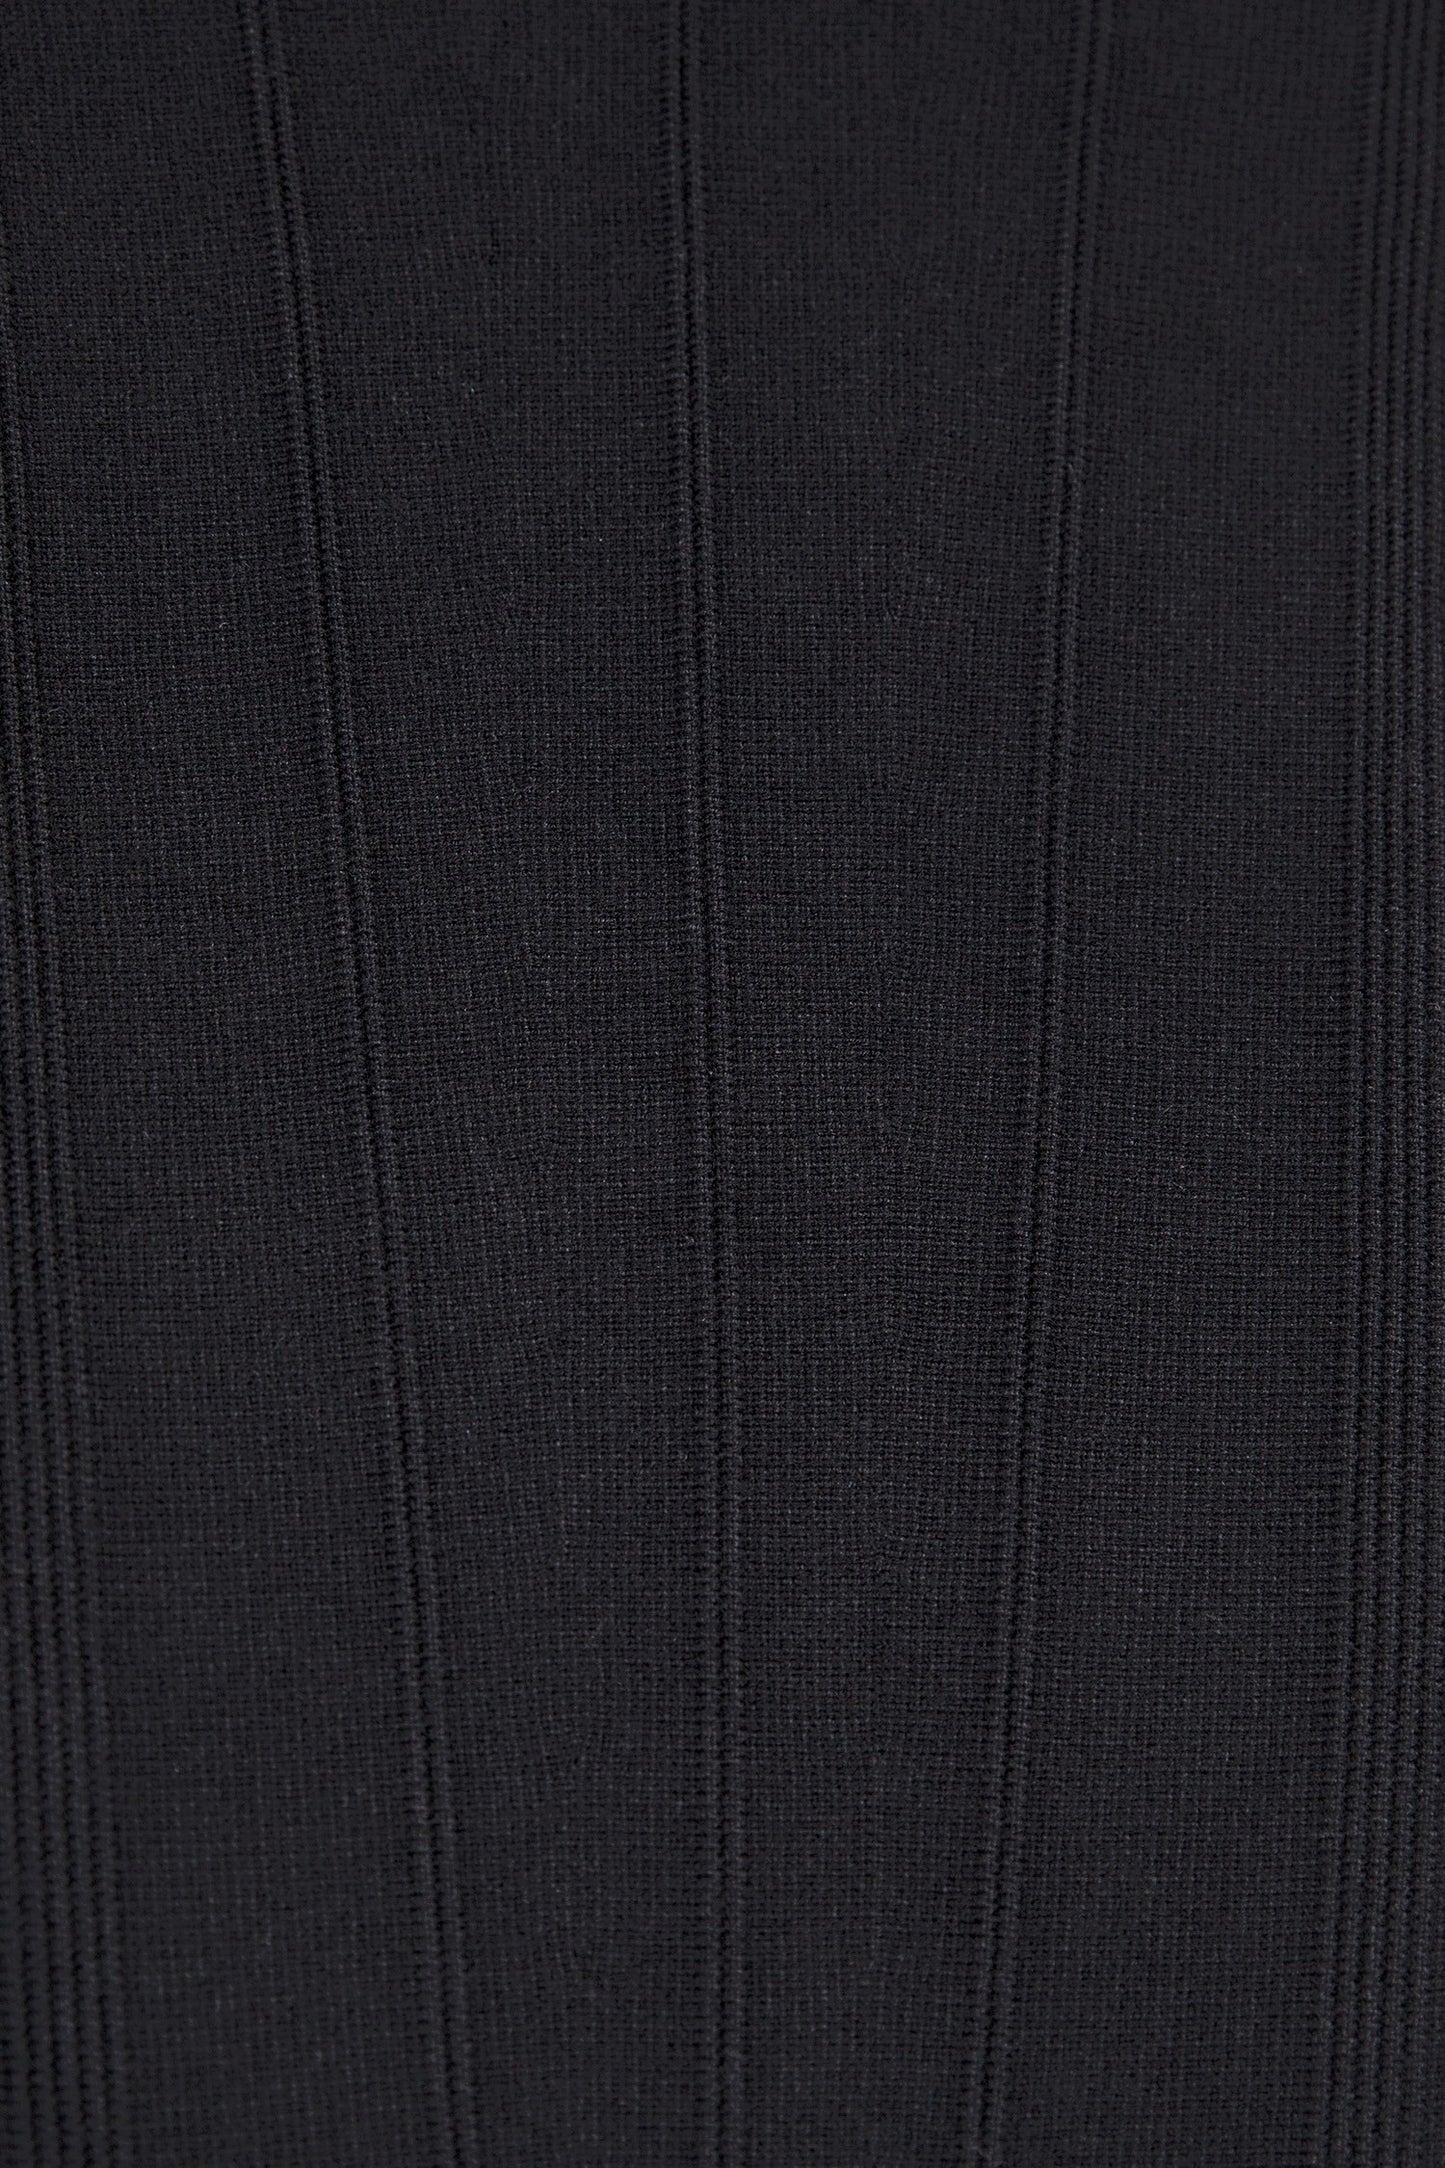 Close up of the knit top fabric 